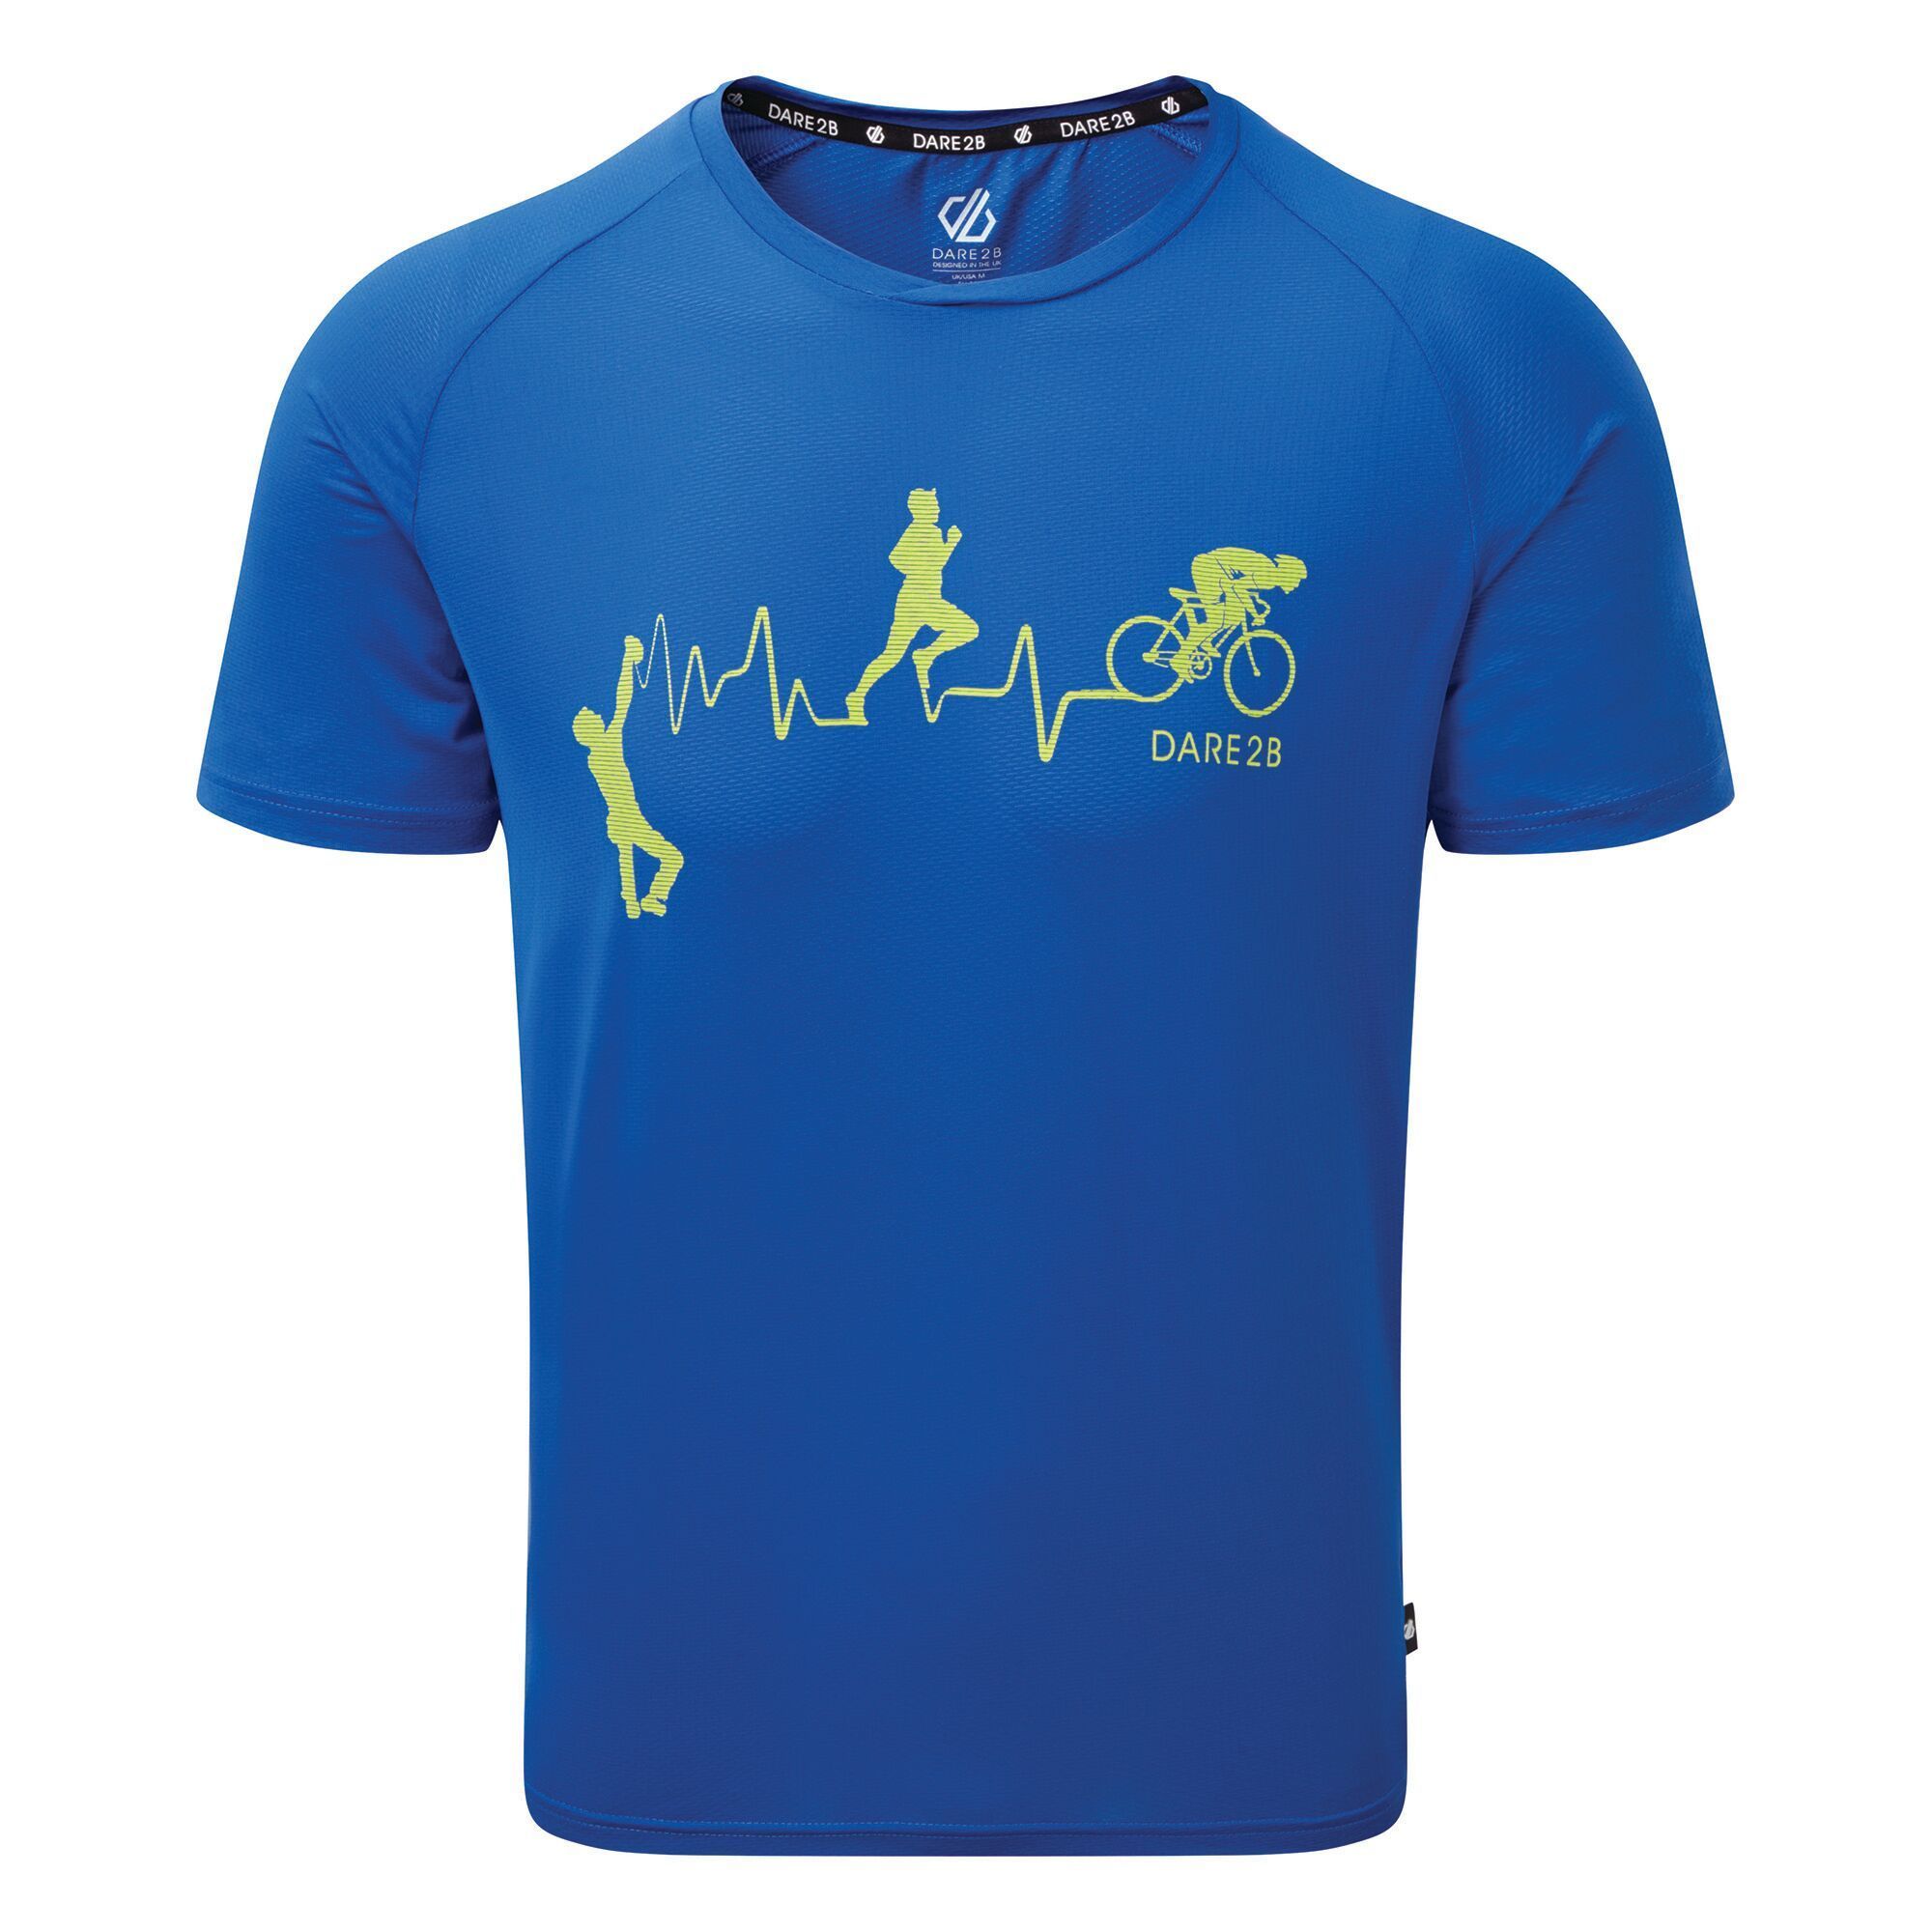 Material: 88% Polyester (Q-Wic lightweight polyester fabric), 12% Elastane. Solid colour short sleeved t-shirt with fabric which moves moisture away from the skin to keep you feeling comfortable during high-energy workouts. Soft and quick drying.